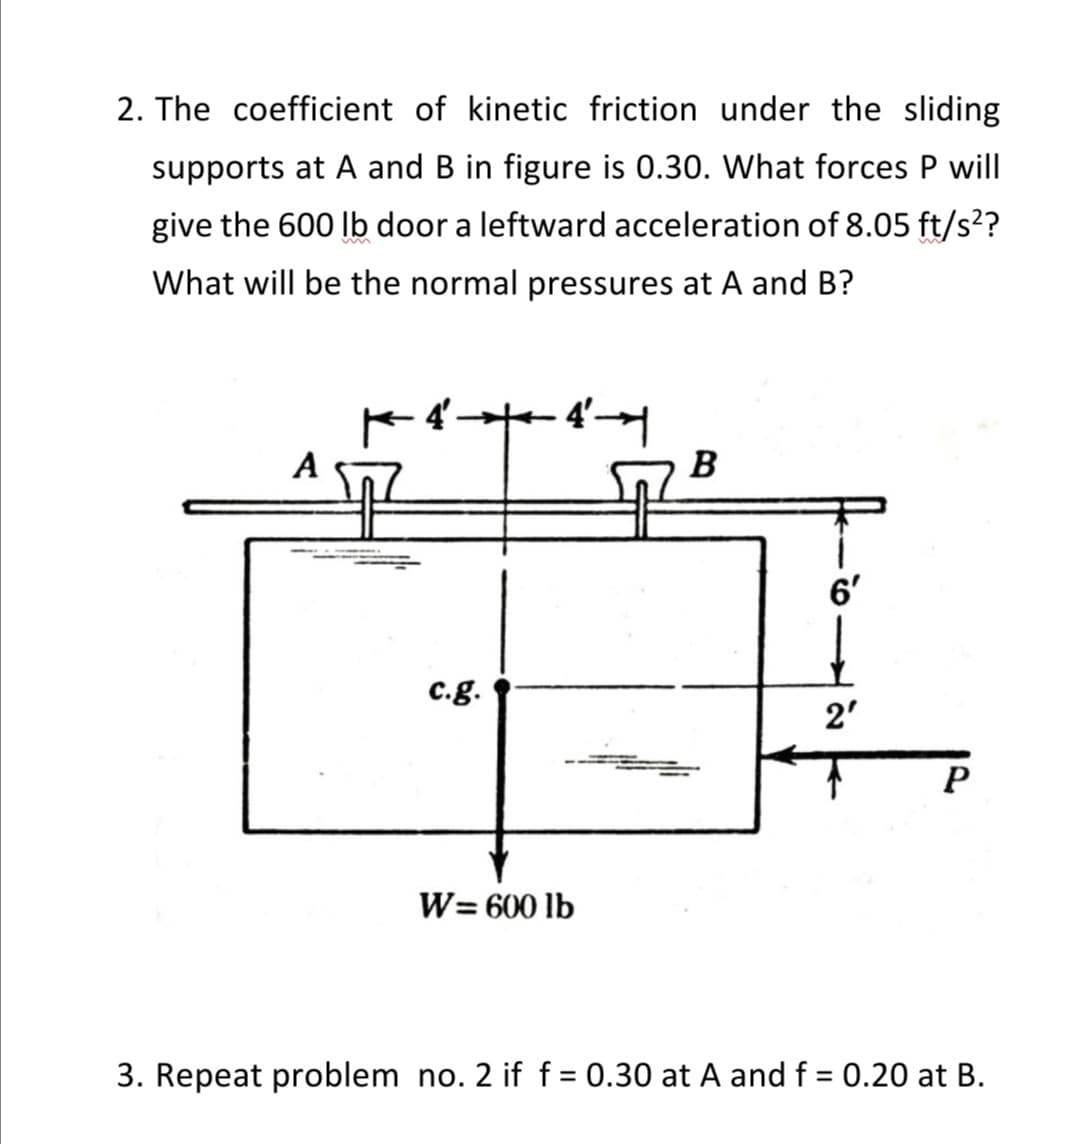 2. The coefficient of kinetic friction under the sliding
supports at A and B in figure is 0.30. What forces P will
give the 600 Ib door a leftward acceleration of 8.05 ft/s?
What will be the normal pressures at A and B?
A
B
6'
c.g.
2'
W= 600 lb
3. Repeat problem no. 2 if f = 0.30 at A and f = 0.20 at B.
